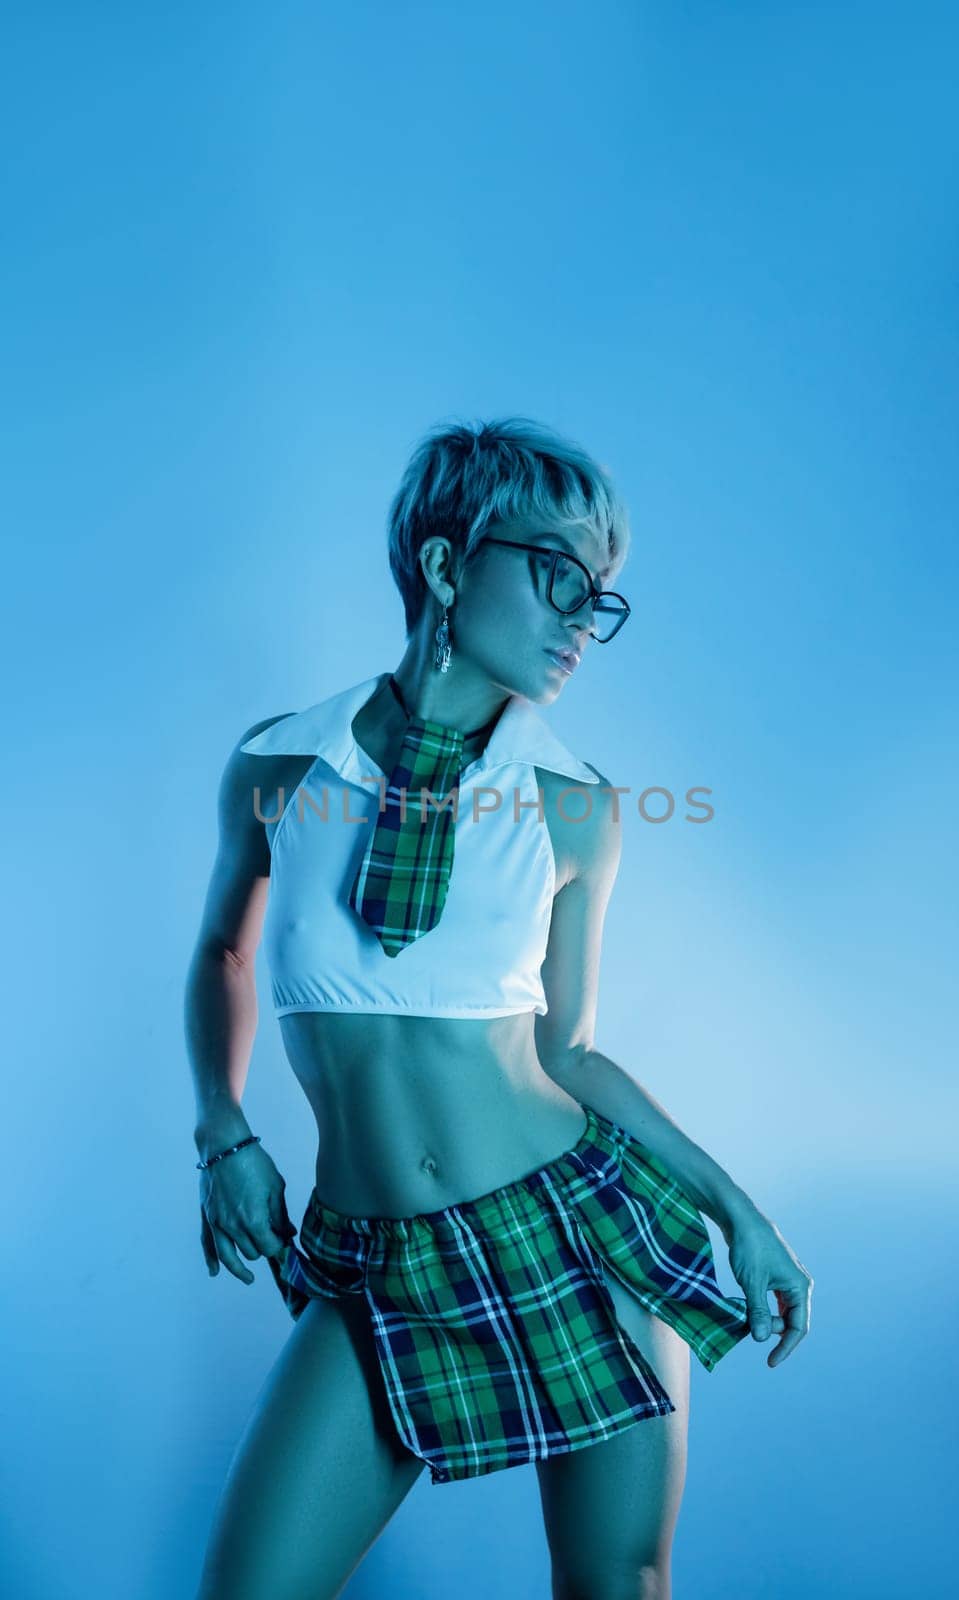 Sexy girl in an erotic school plaid skirt costume from a sex shop in blue neon light on a copy paste background